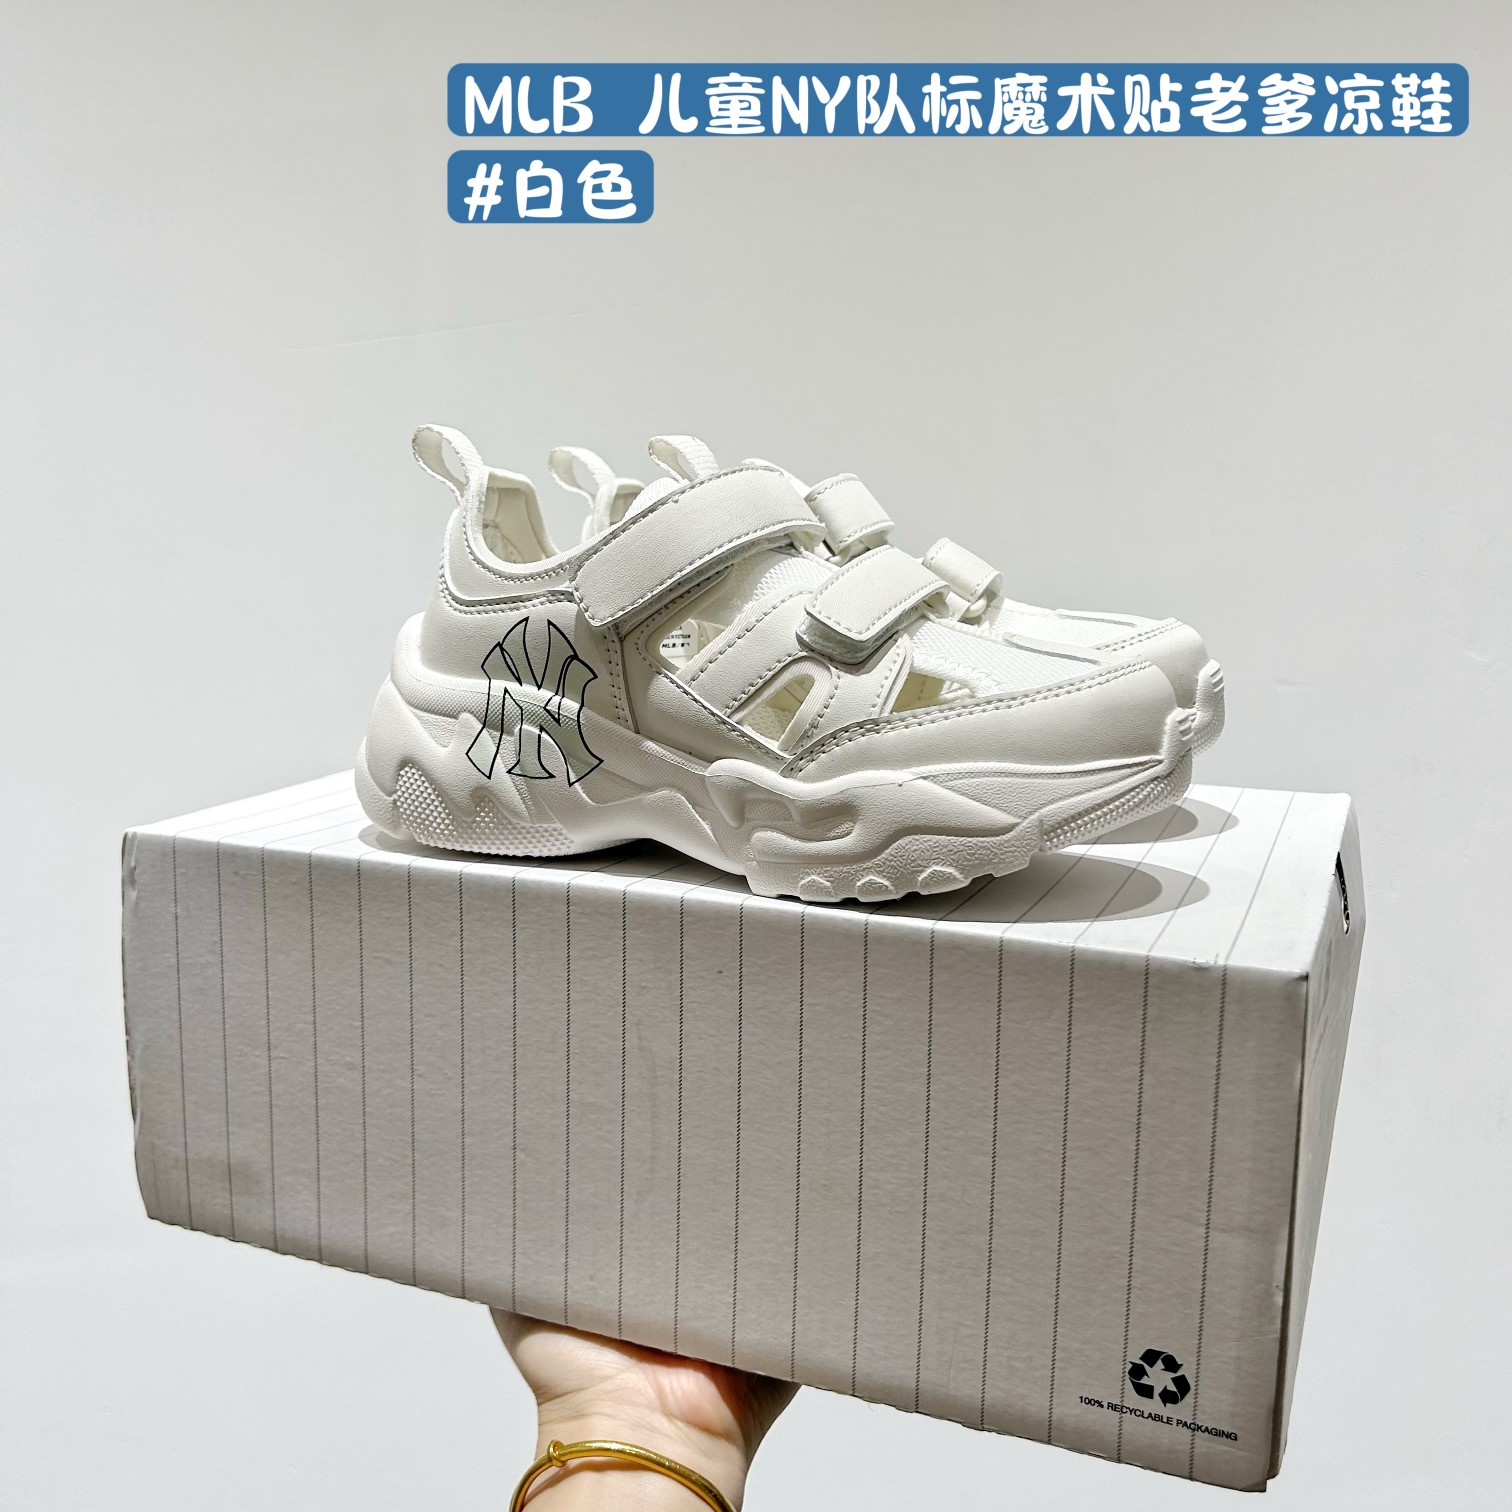 MLB Shoes Sandals Buy Cheap
 White